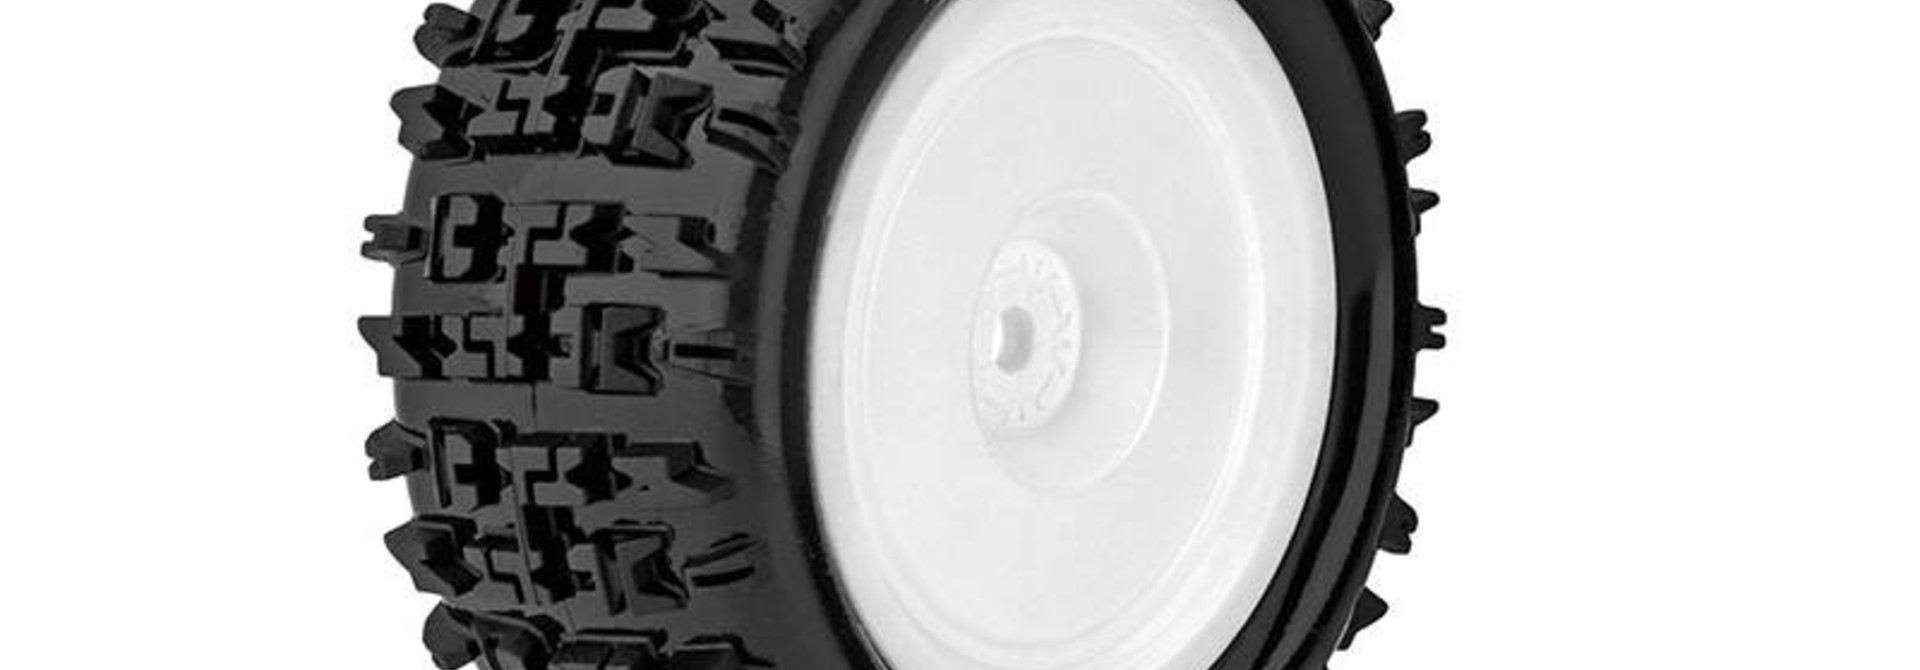 Louise RC - E-PIONEER - 1-10 Buggy Tire Set - Mounted - Soft - White Rims - Hex 12mm - Rear - L-T3278SWKR